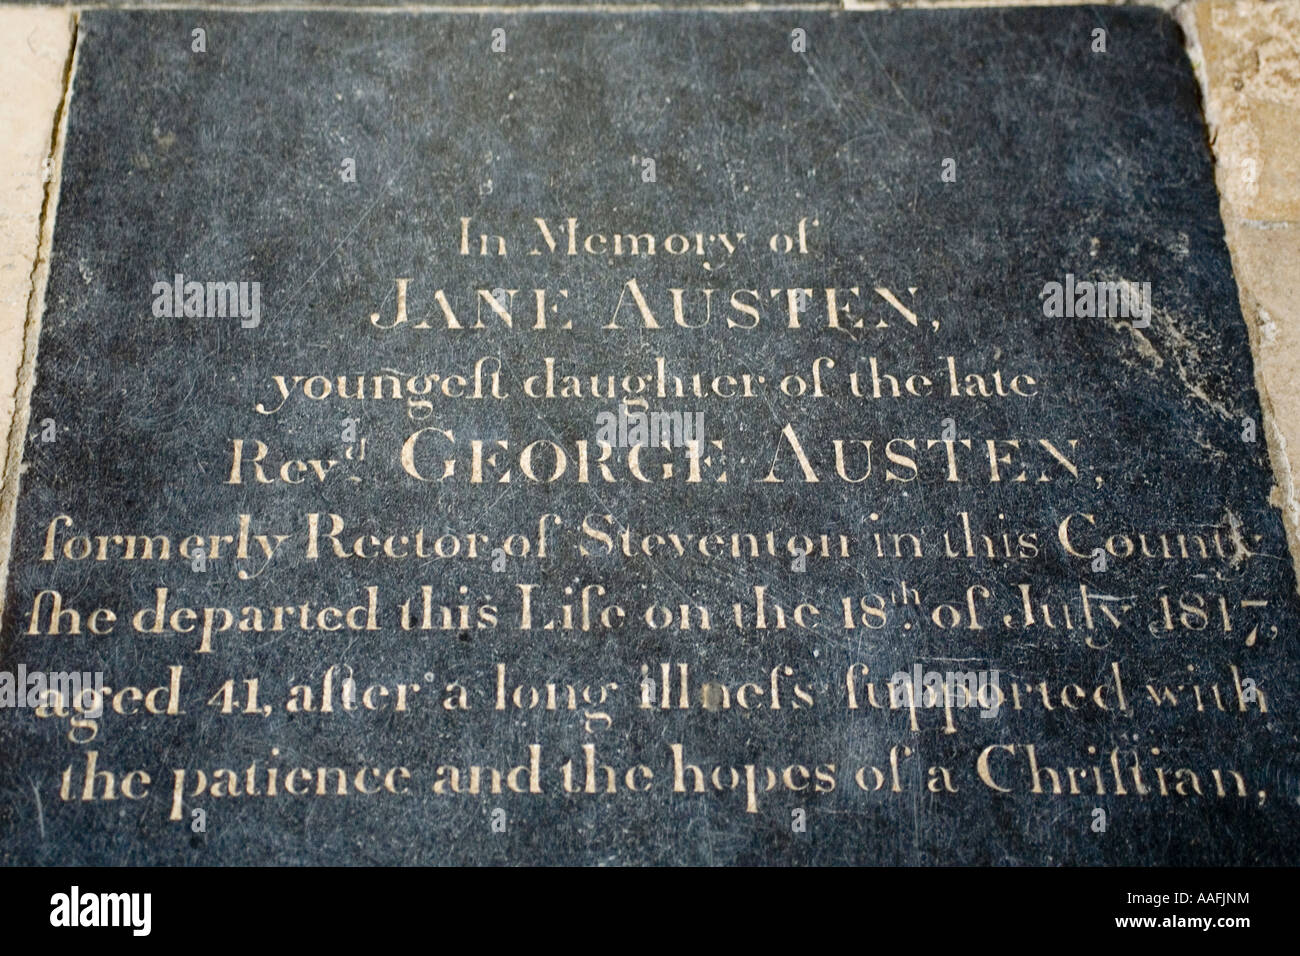 england-hampshire-winchester-jane-austen-grave-in-cathedral-AAFJNM.jpg